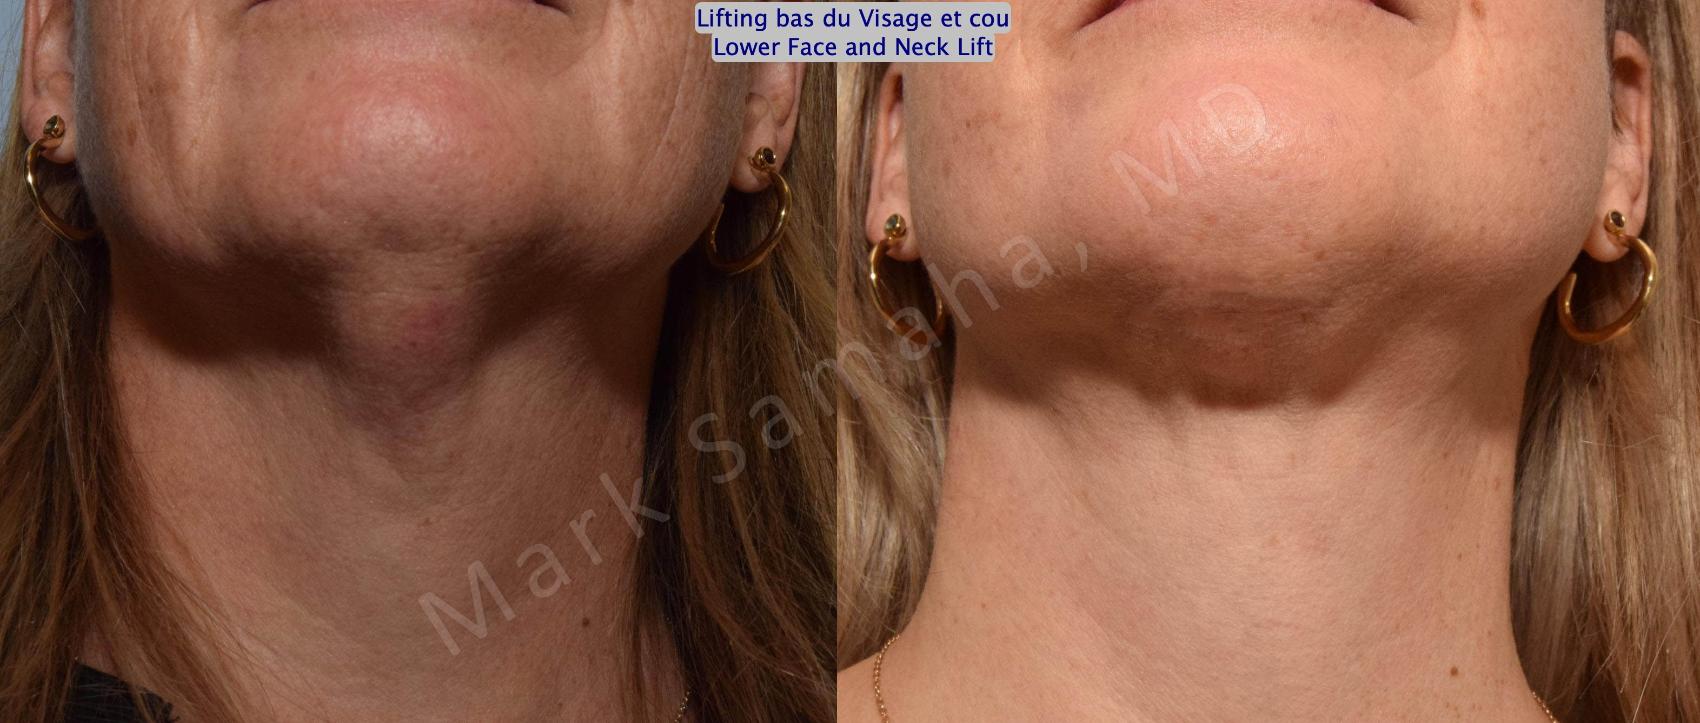 Before & After Lifting du visage / Cou - Facelift / Necklift Case 160 Neck Cou View in Montreal, QC